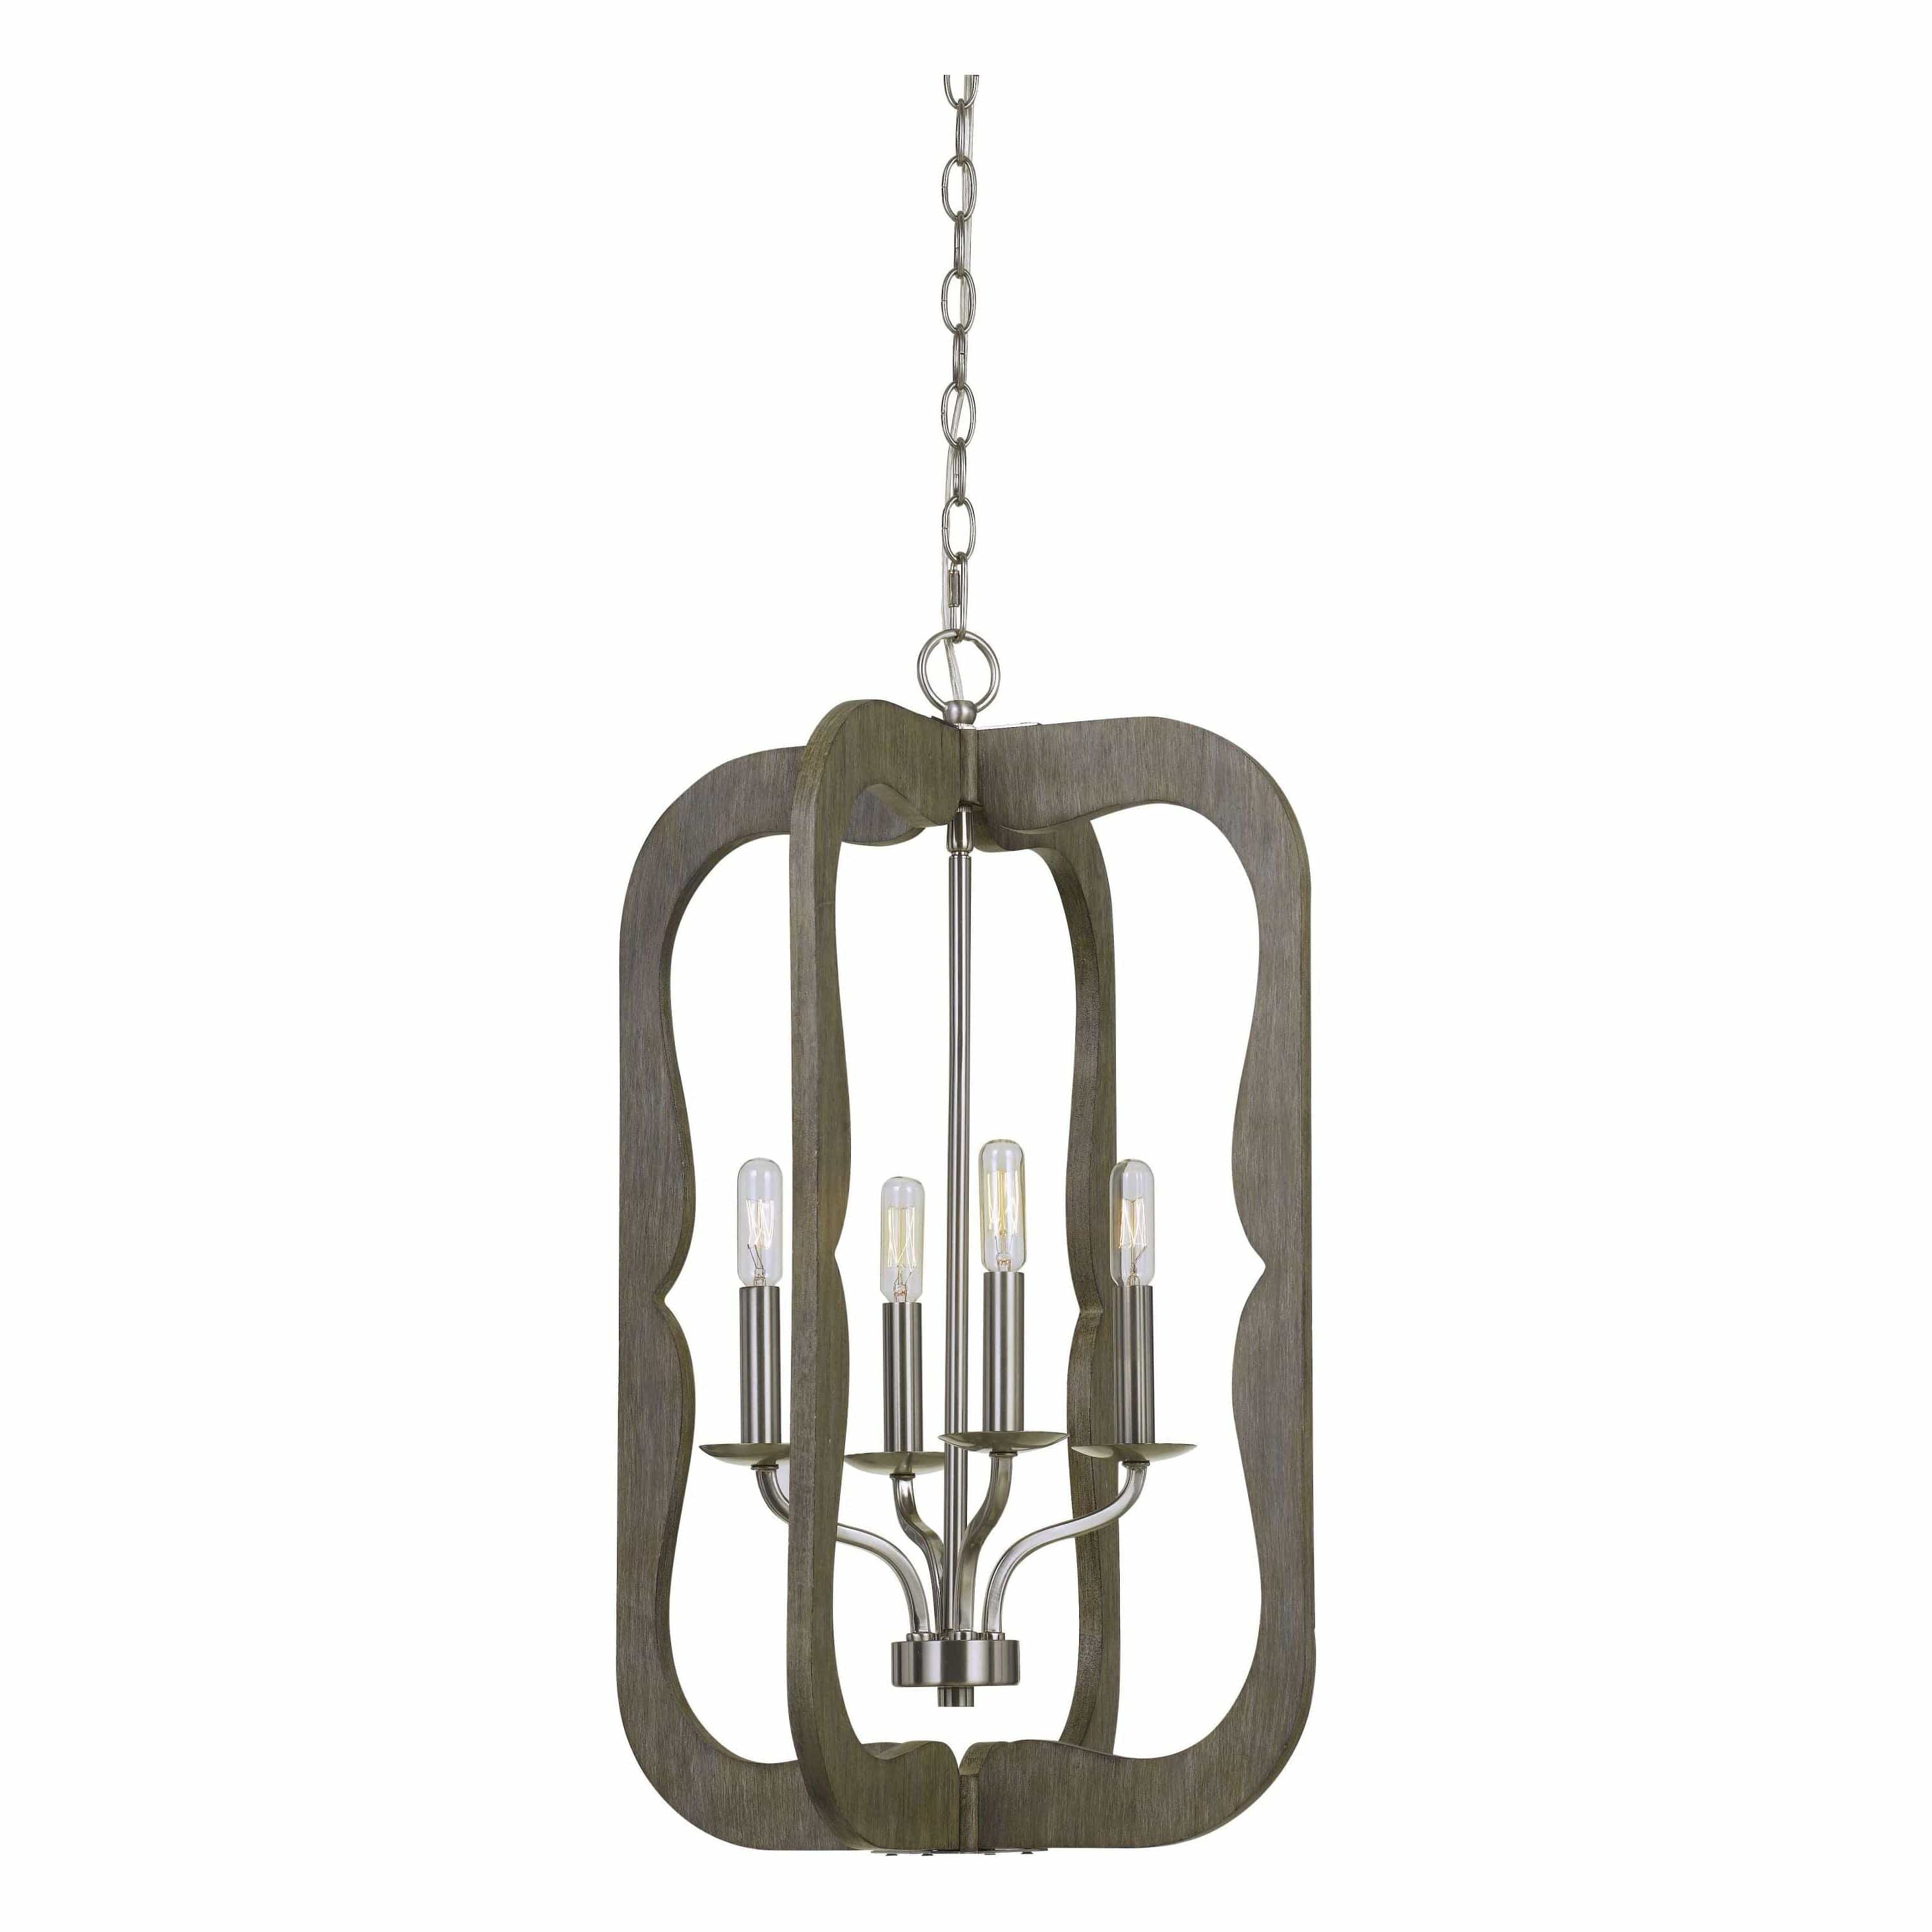 Benzara Wooden Cut Out Design Frame Pendant Fixture With Chain, Distressed Brown By Benzara Chandeliers BM224722